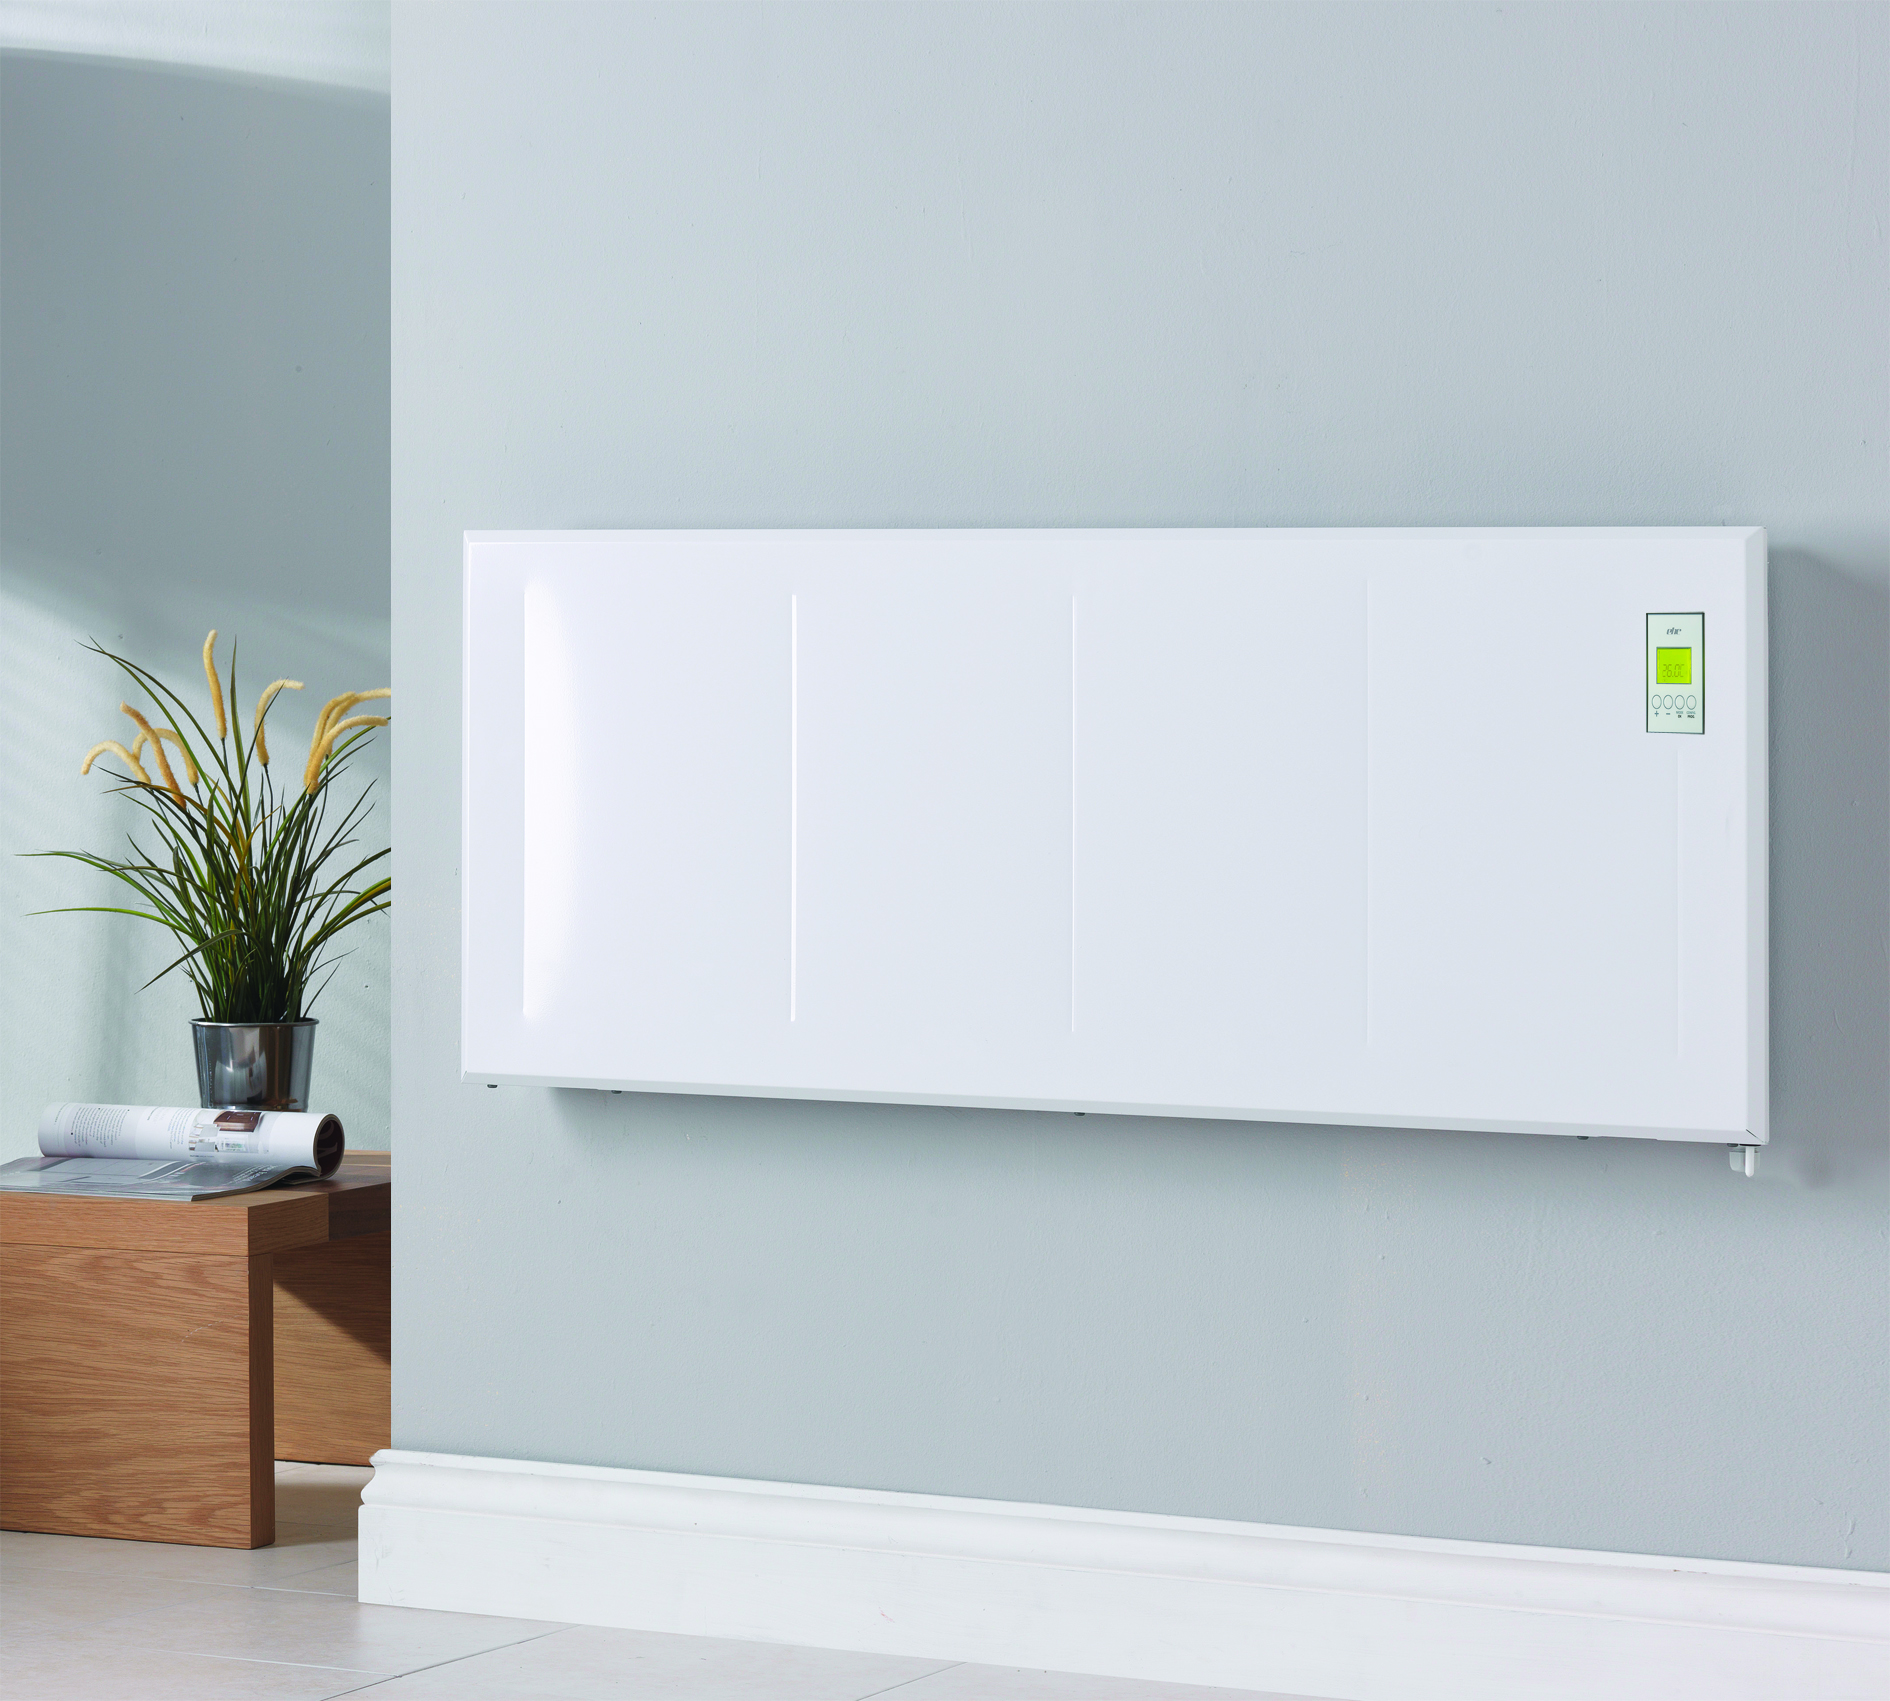 Hybrid Heating for the modern home – the choice is yours @EHC_UK